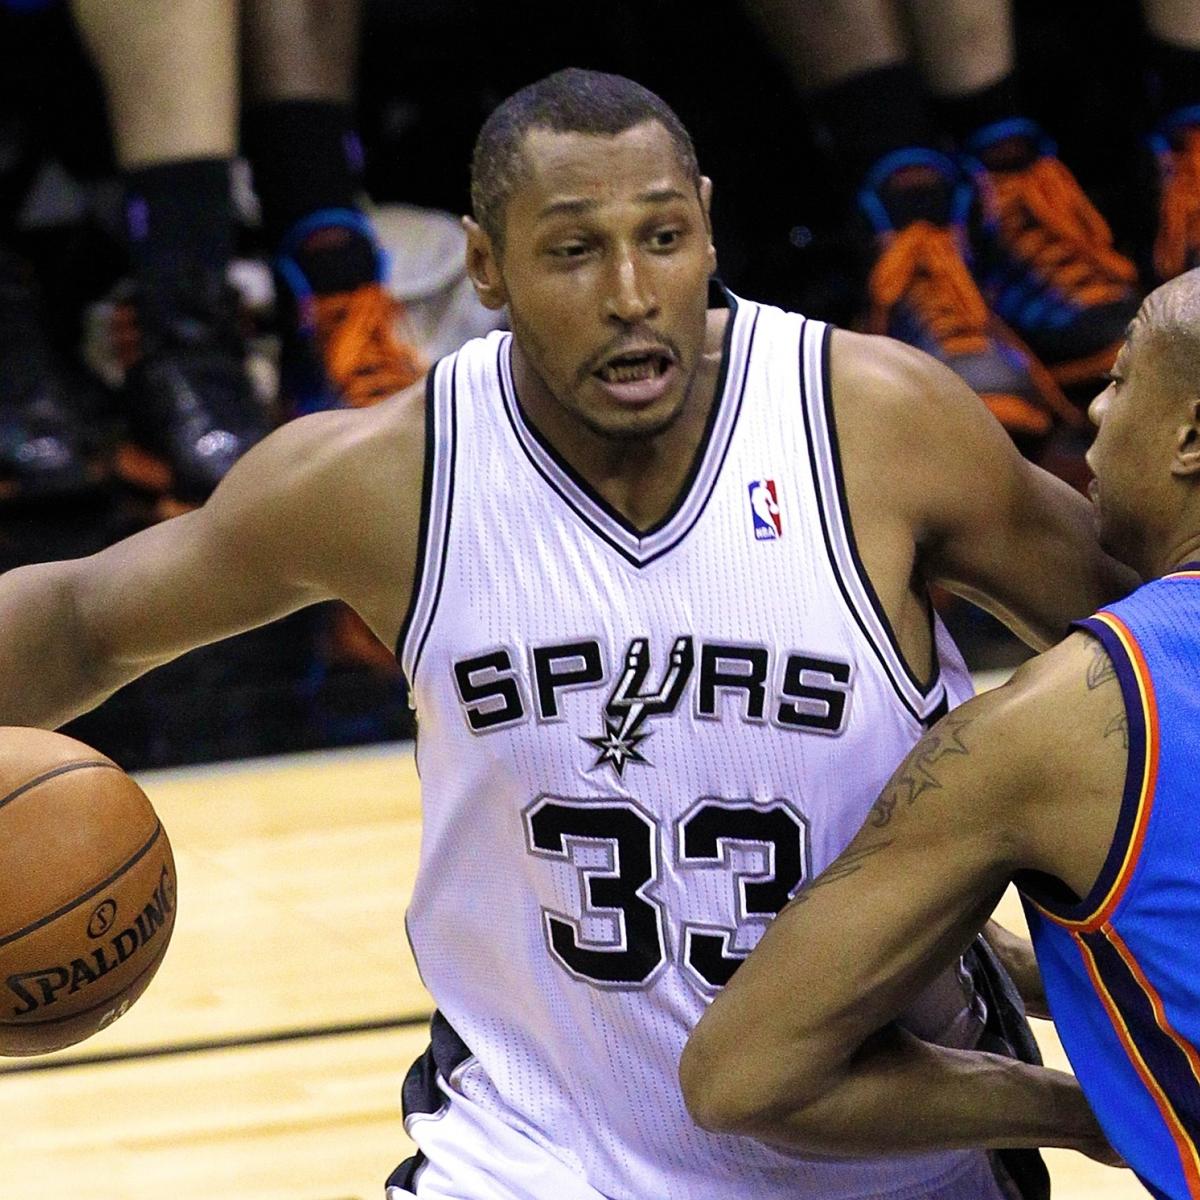 Spurs' Boris Diaw will get $500,000 in bonuses if he stays in shape 